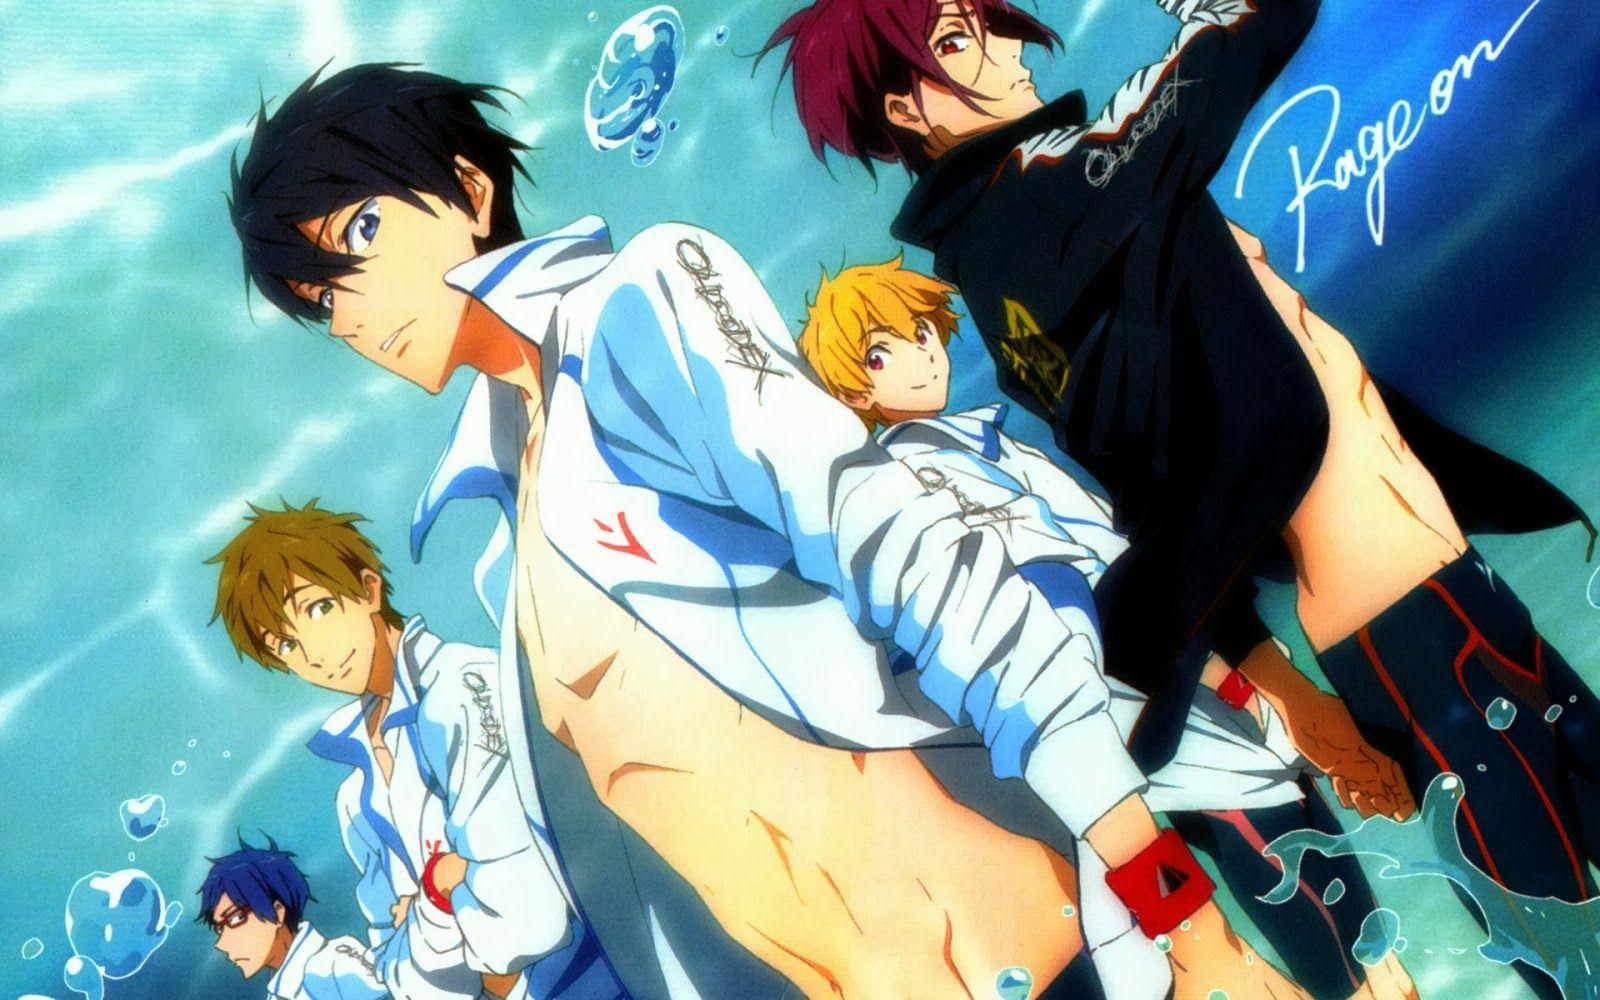 Dare to be stupid!: Free! Don't let teh Ghey fool you, it's awesome!